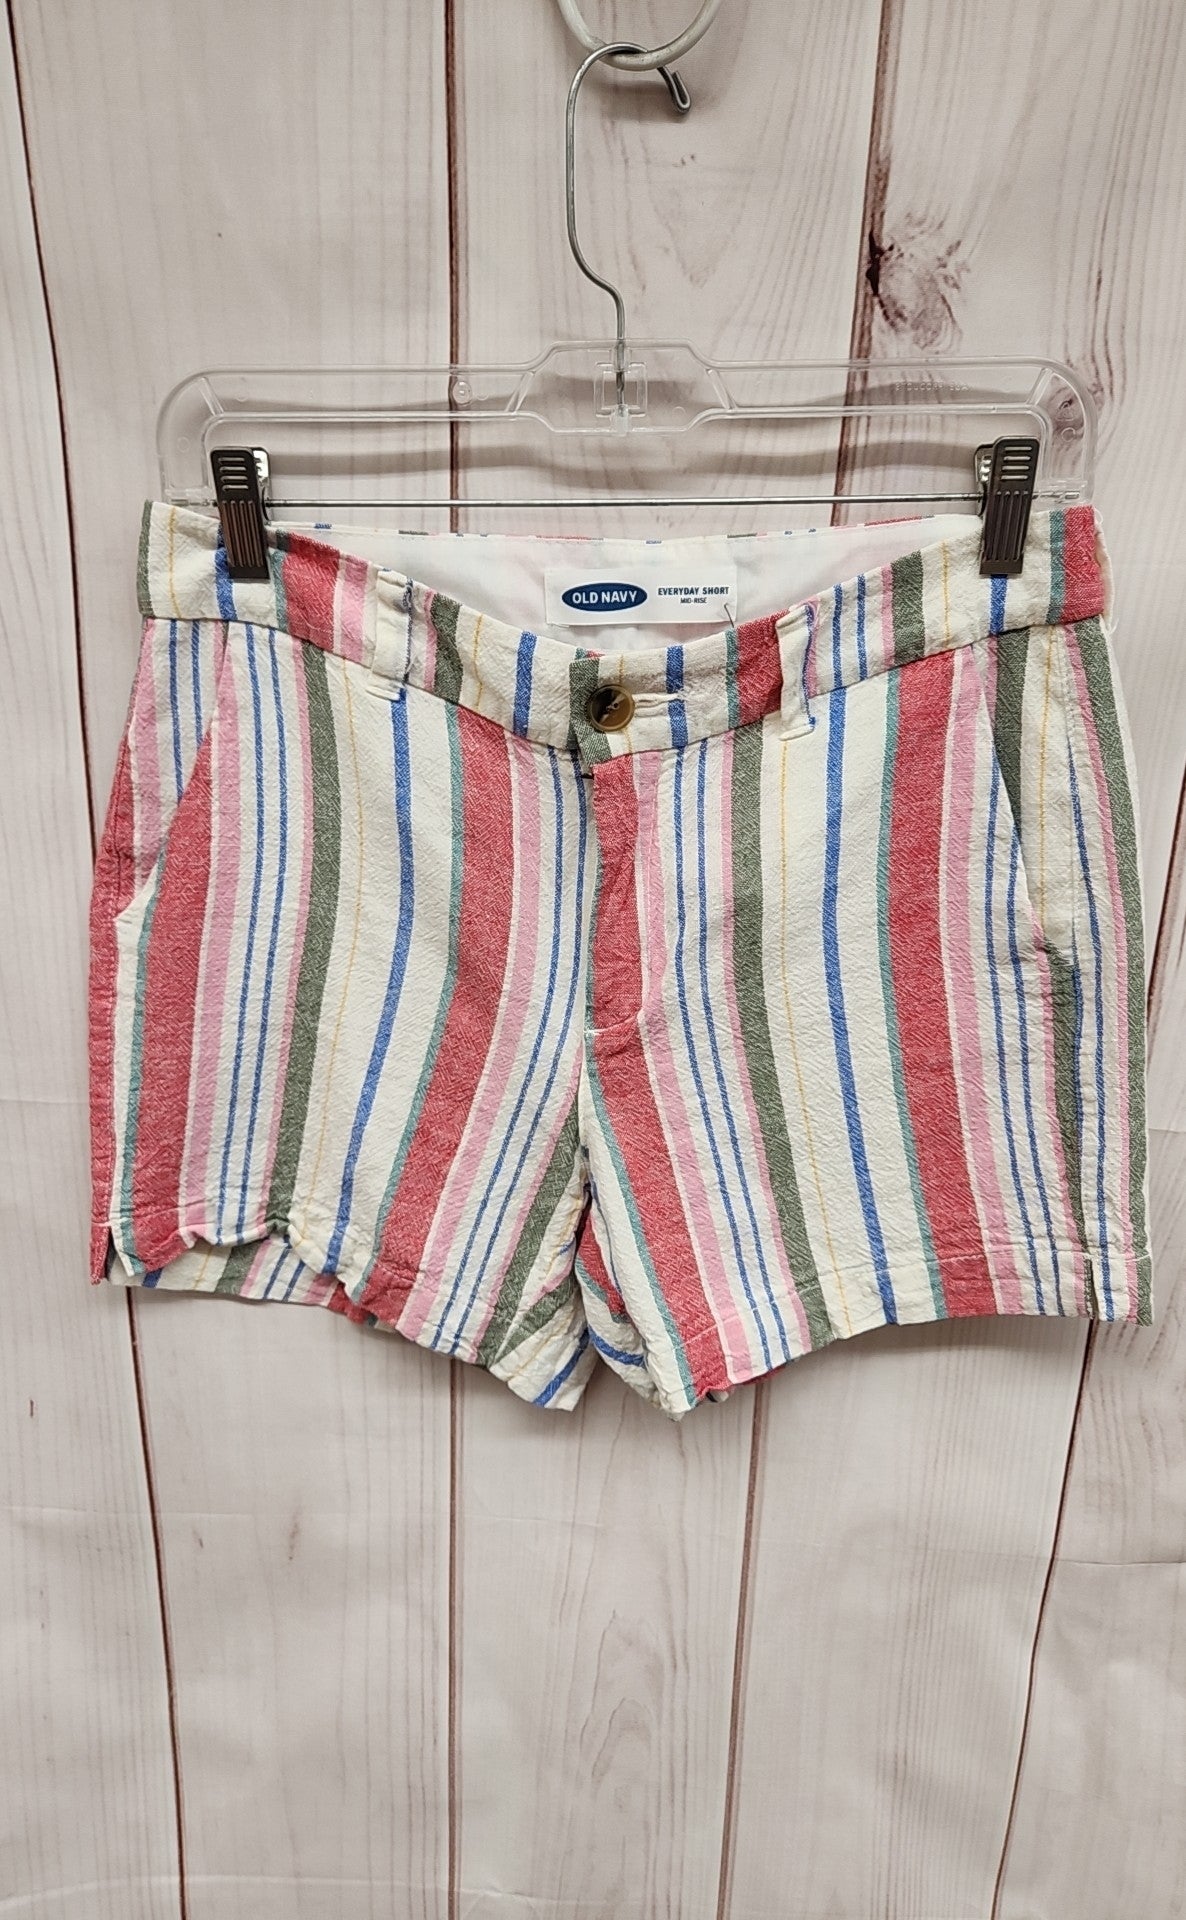 Old Navy Women's Size 4 Multi-Color Shorts